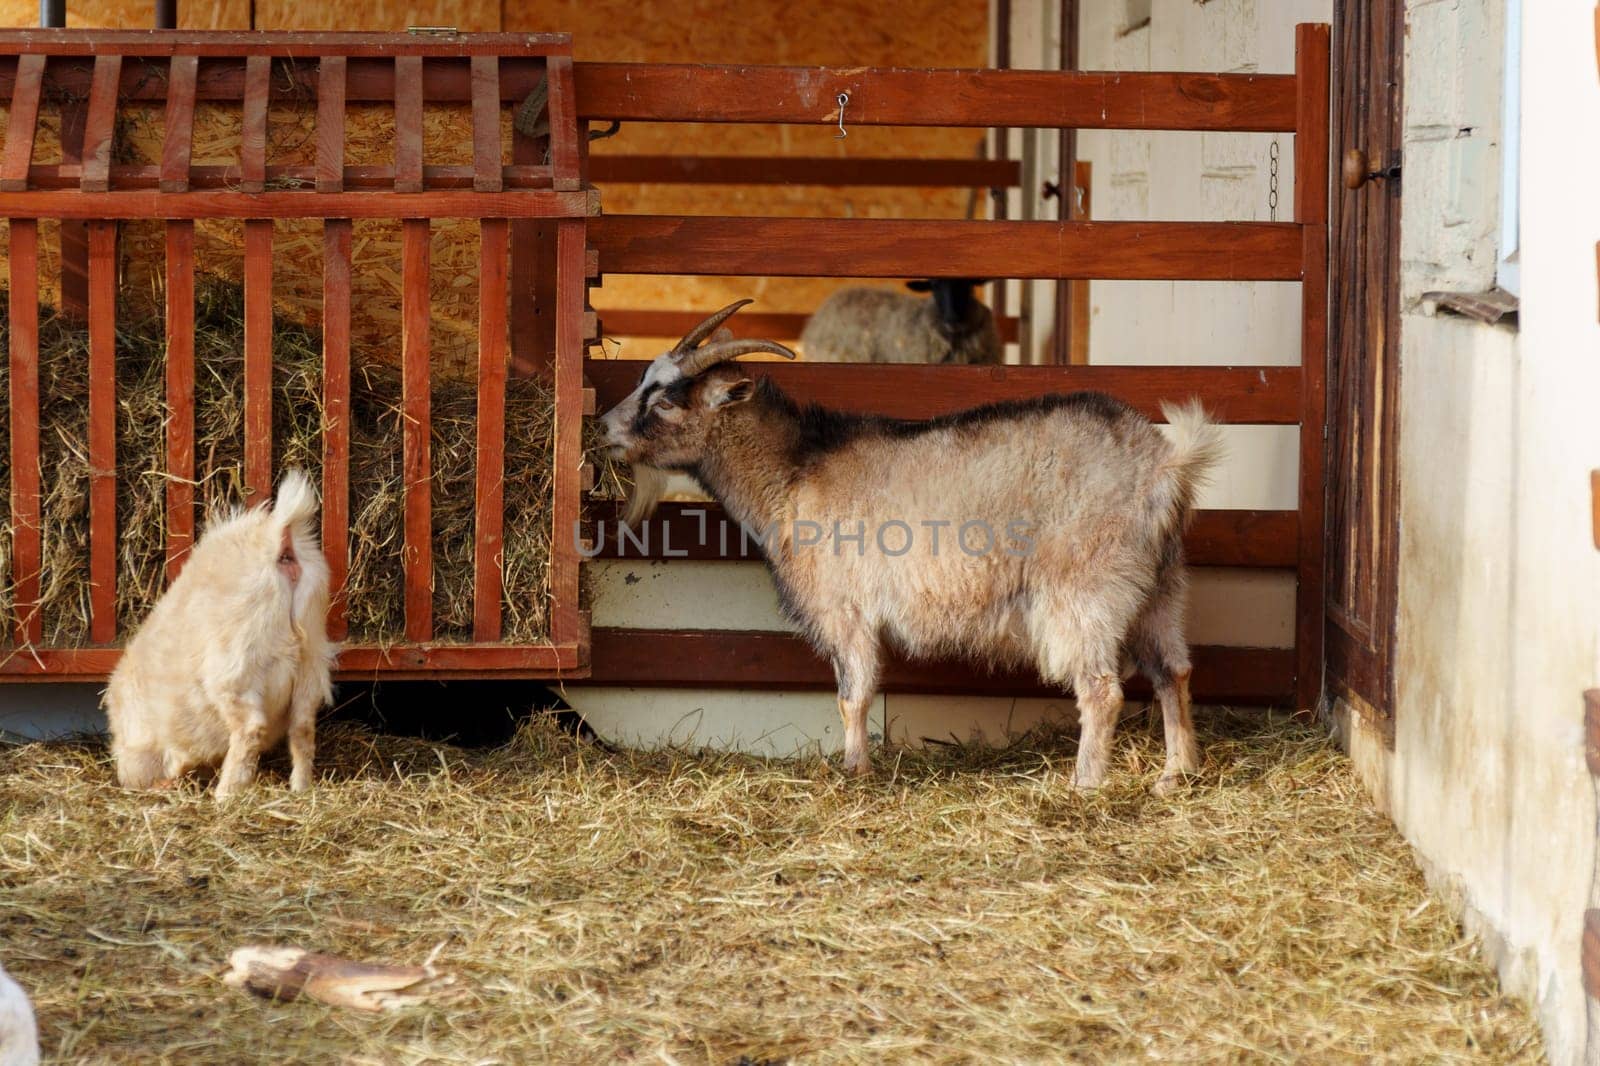 Goats on farm look peaceful and content in their enclosed environment. Selective focus by darksoul72